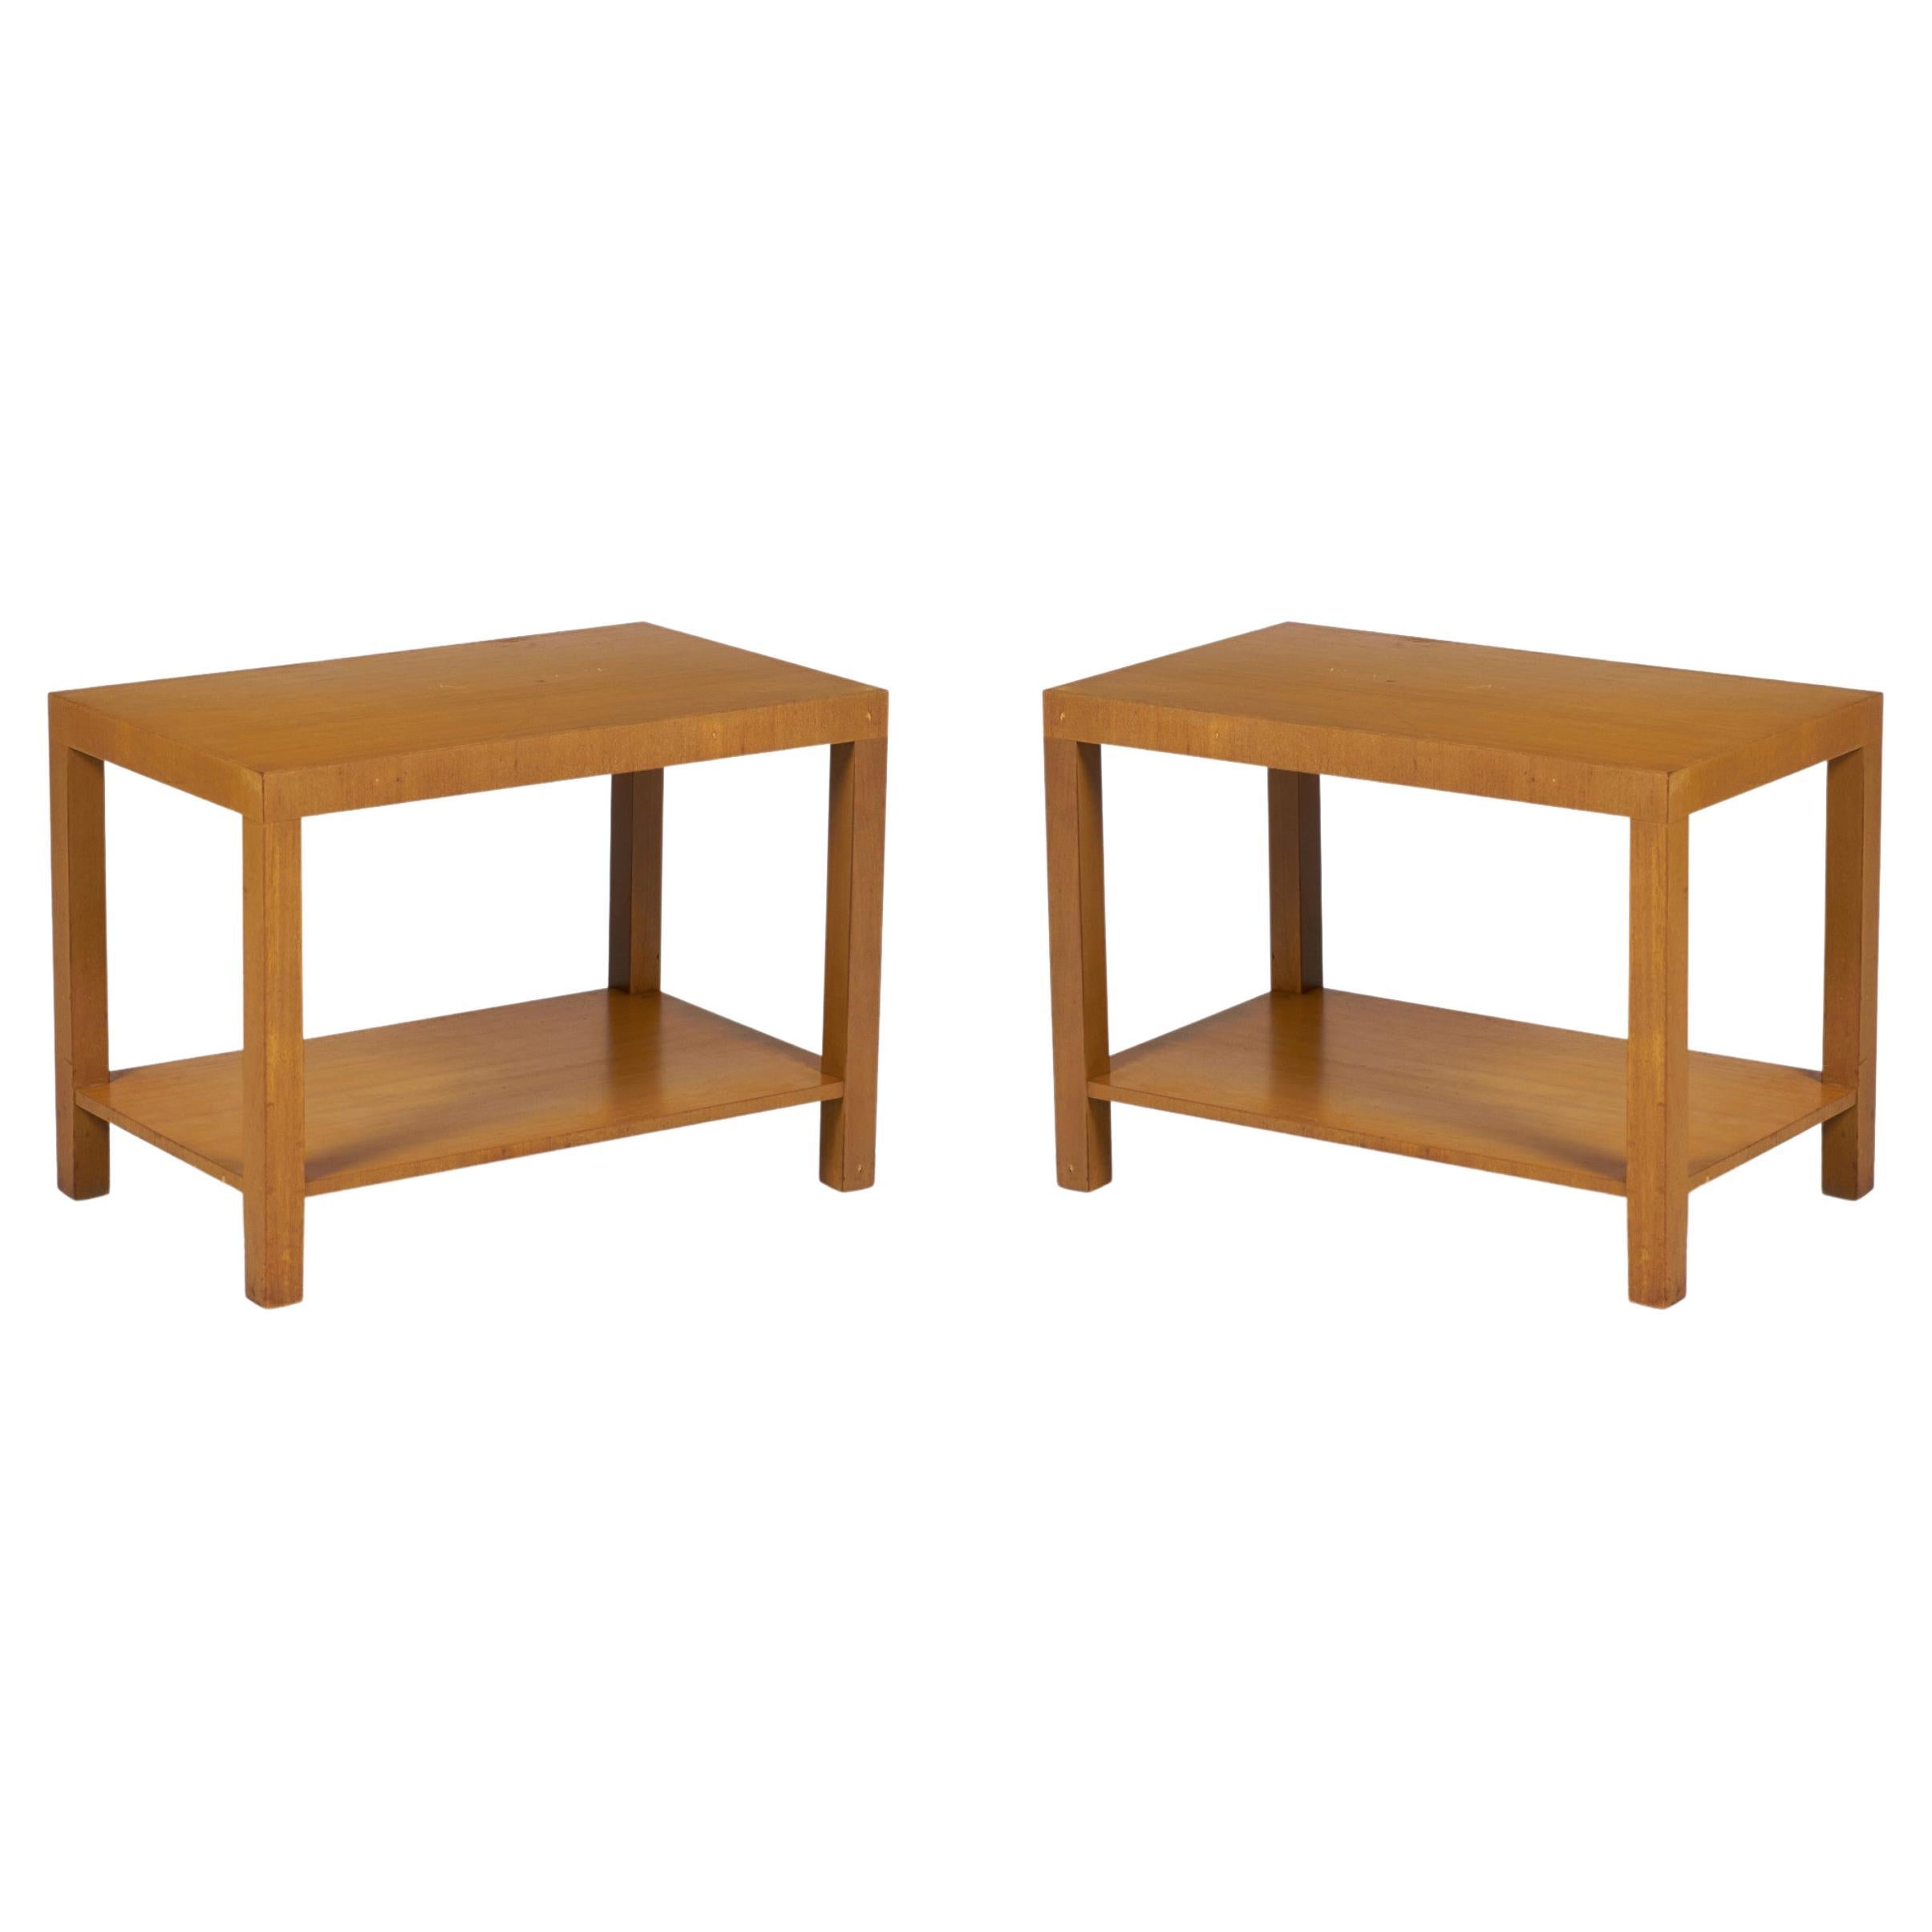 Pair of Widdicomb Modern American Mid-Century Parsons Style Wooden End Tables